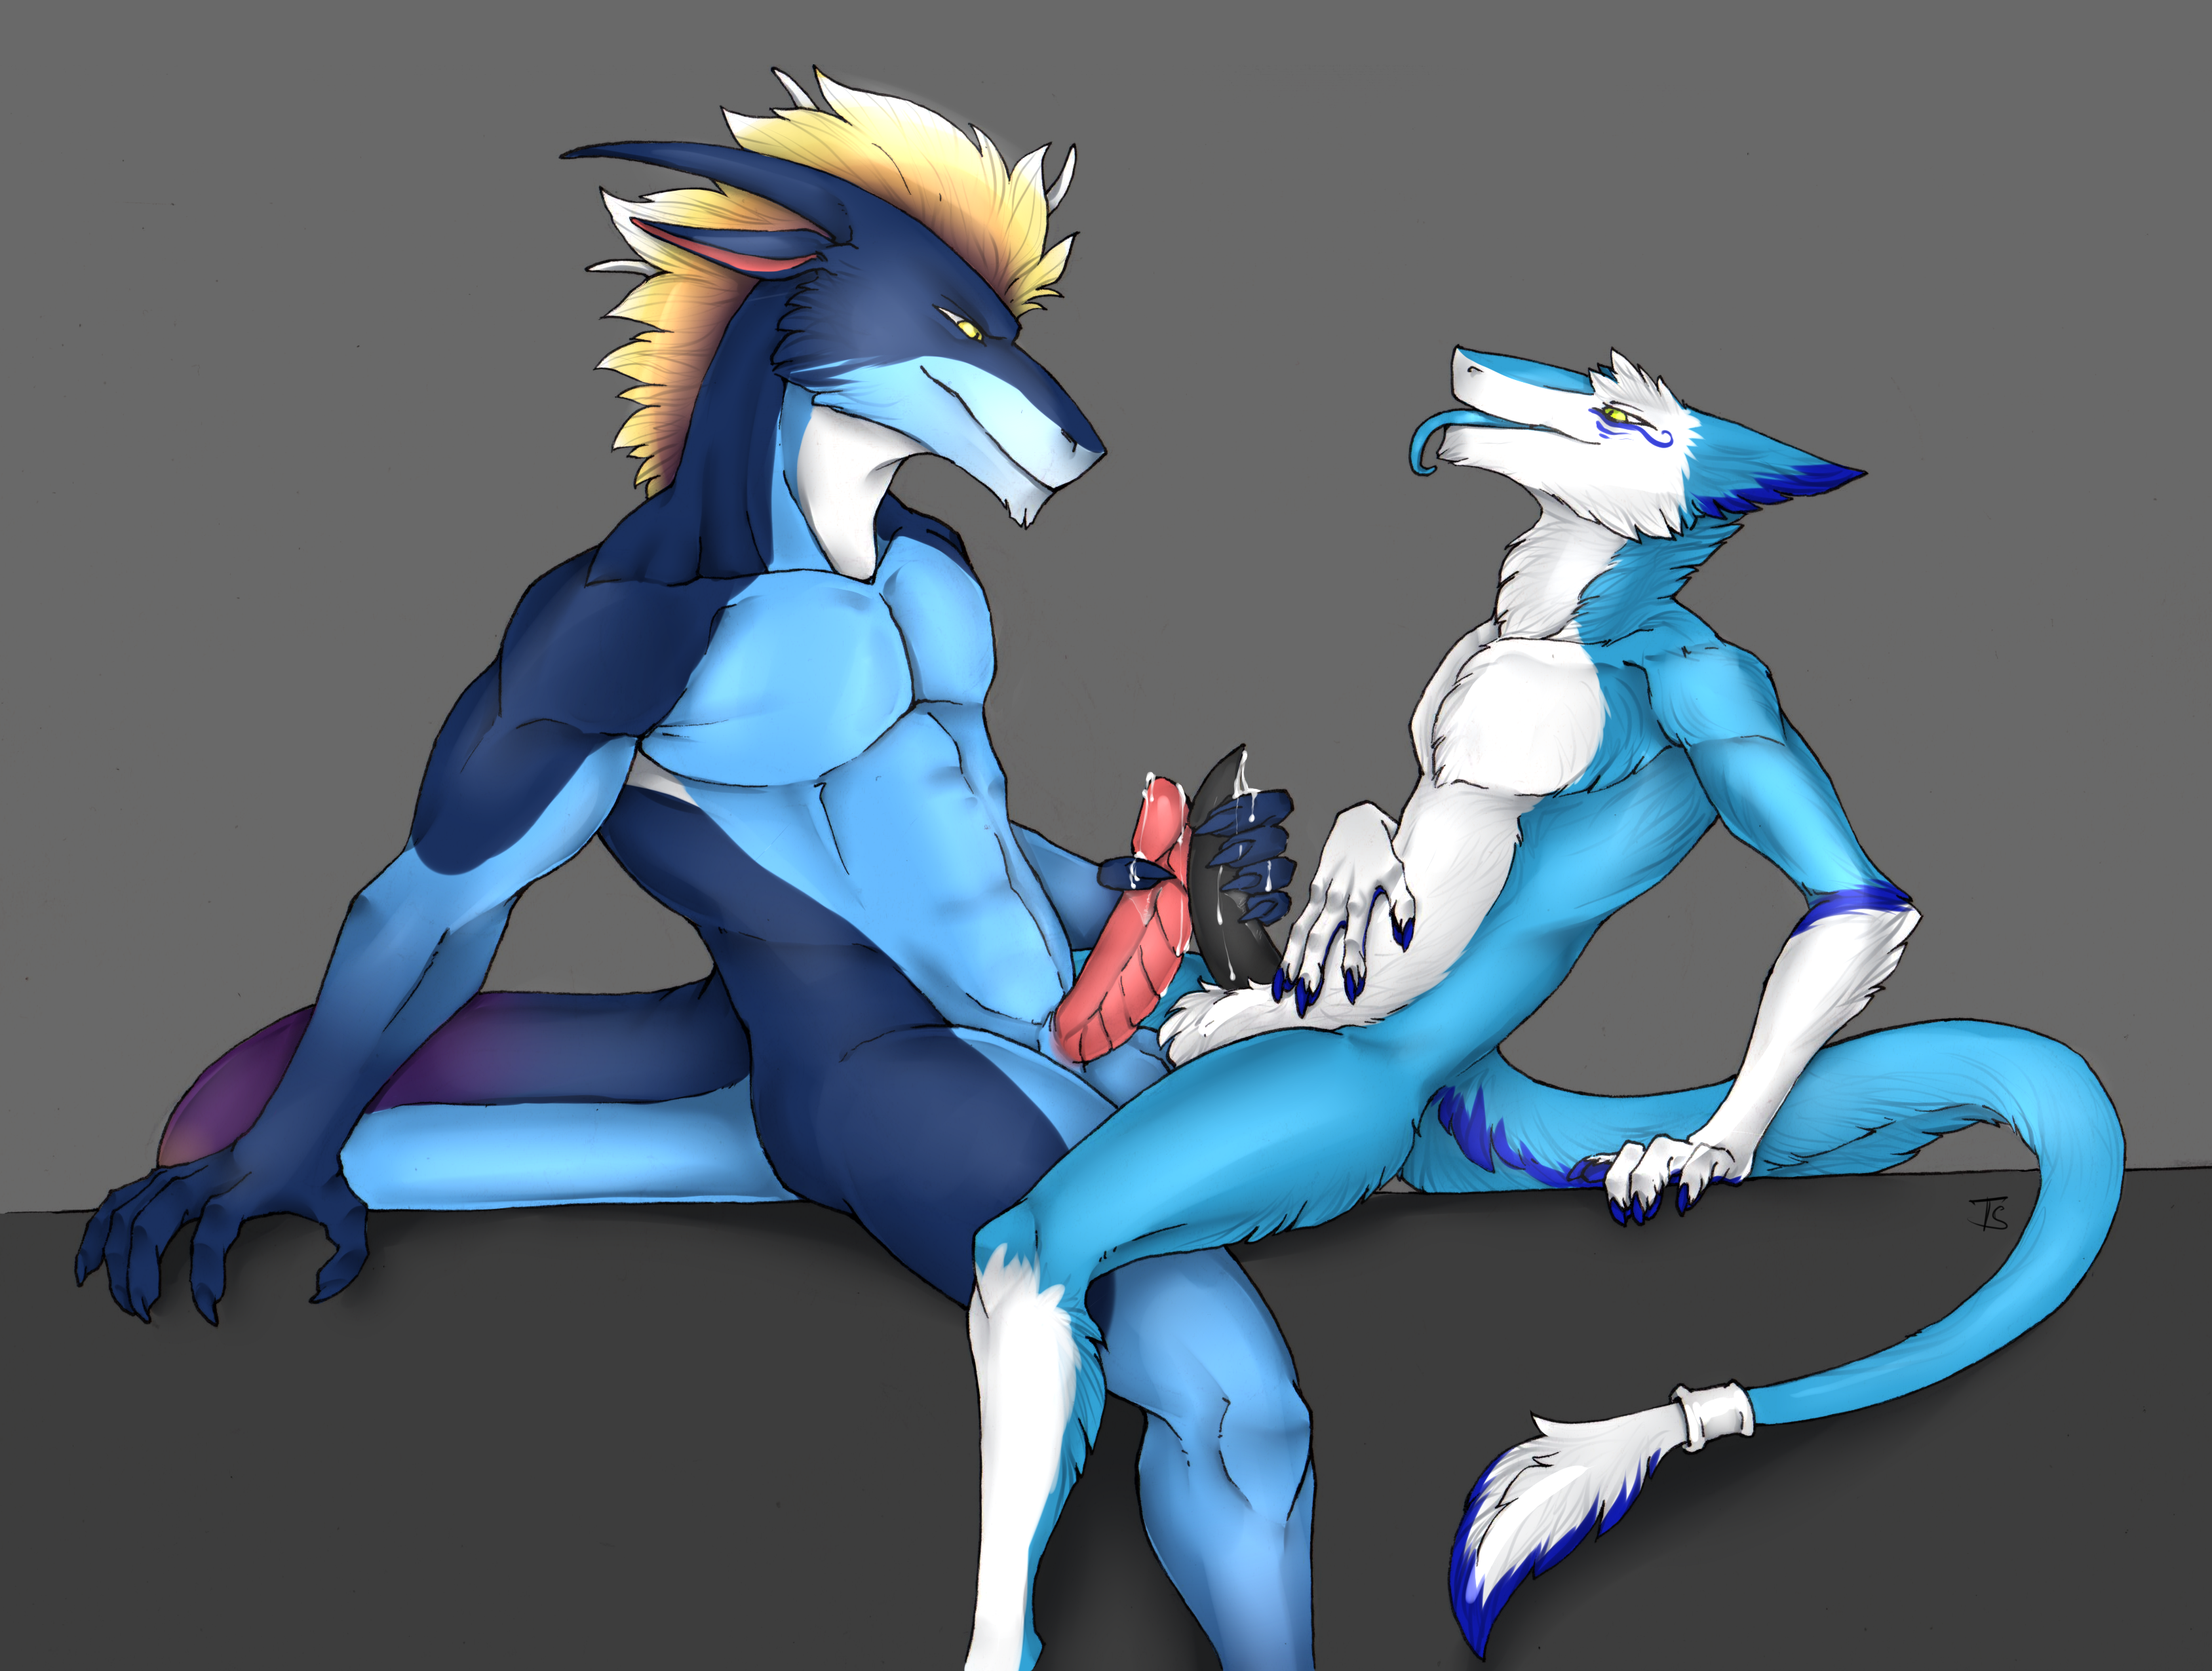 yiffing.in - Gallery: yiff_dragons 